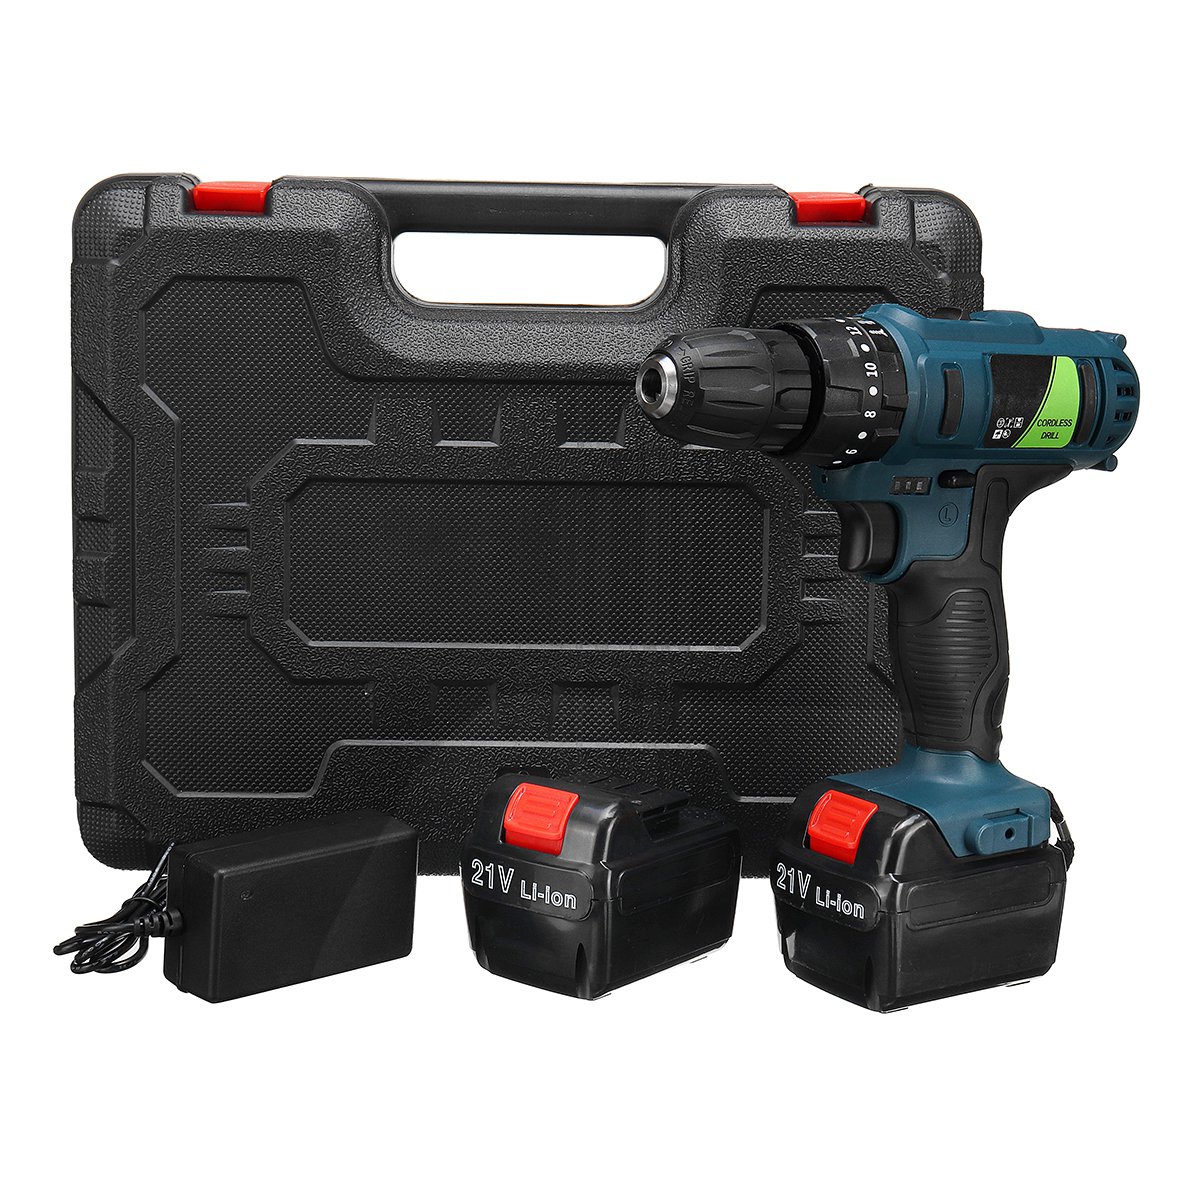 Adjustable-21V-Rechargeable-Cordless-Power-Impact-Drill-Electric-Screwdriver-with-2-Li-ion-Battery-1354629-3